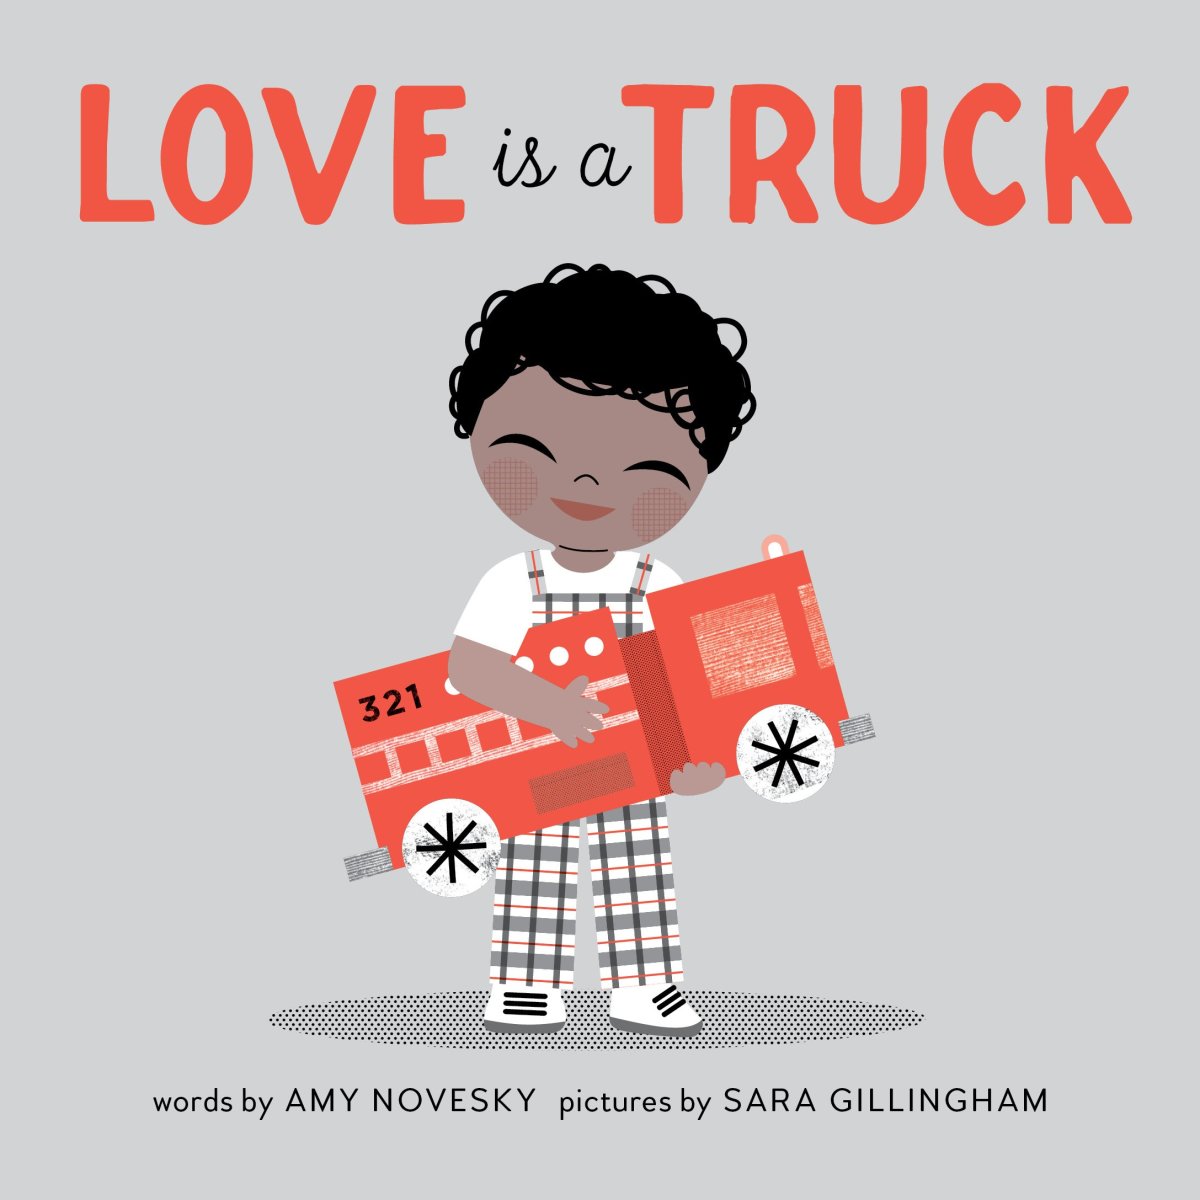 Love Is a Truck by Amy Novesky